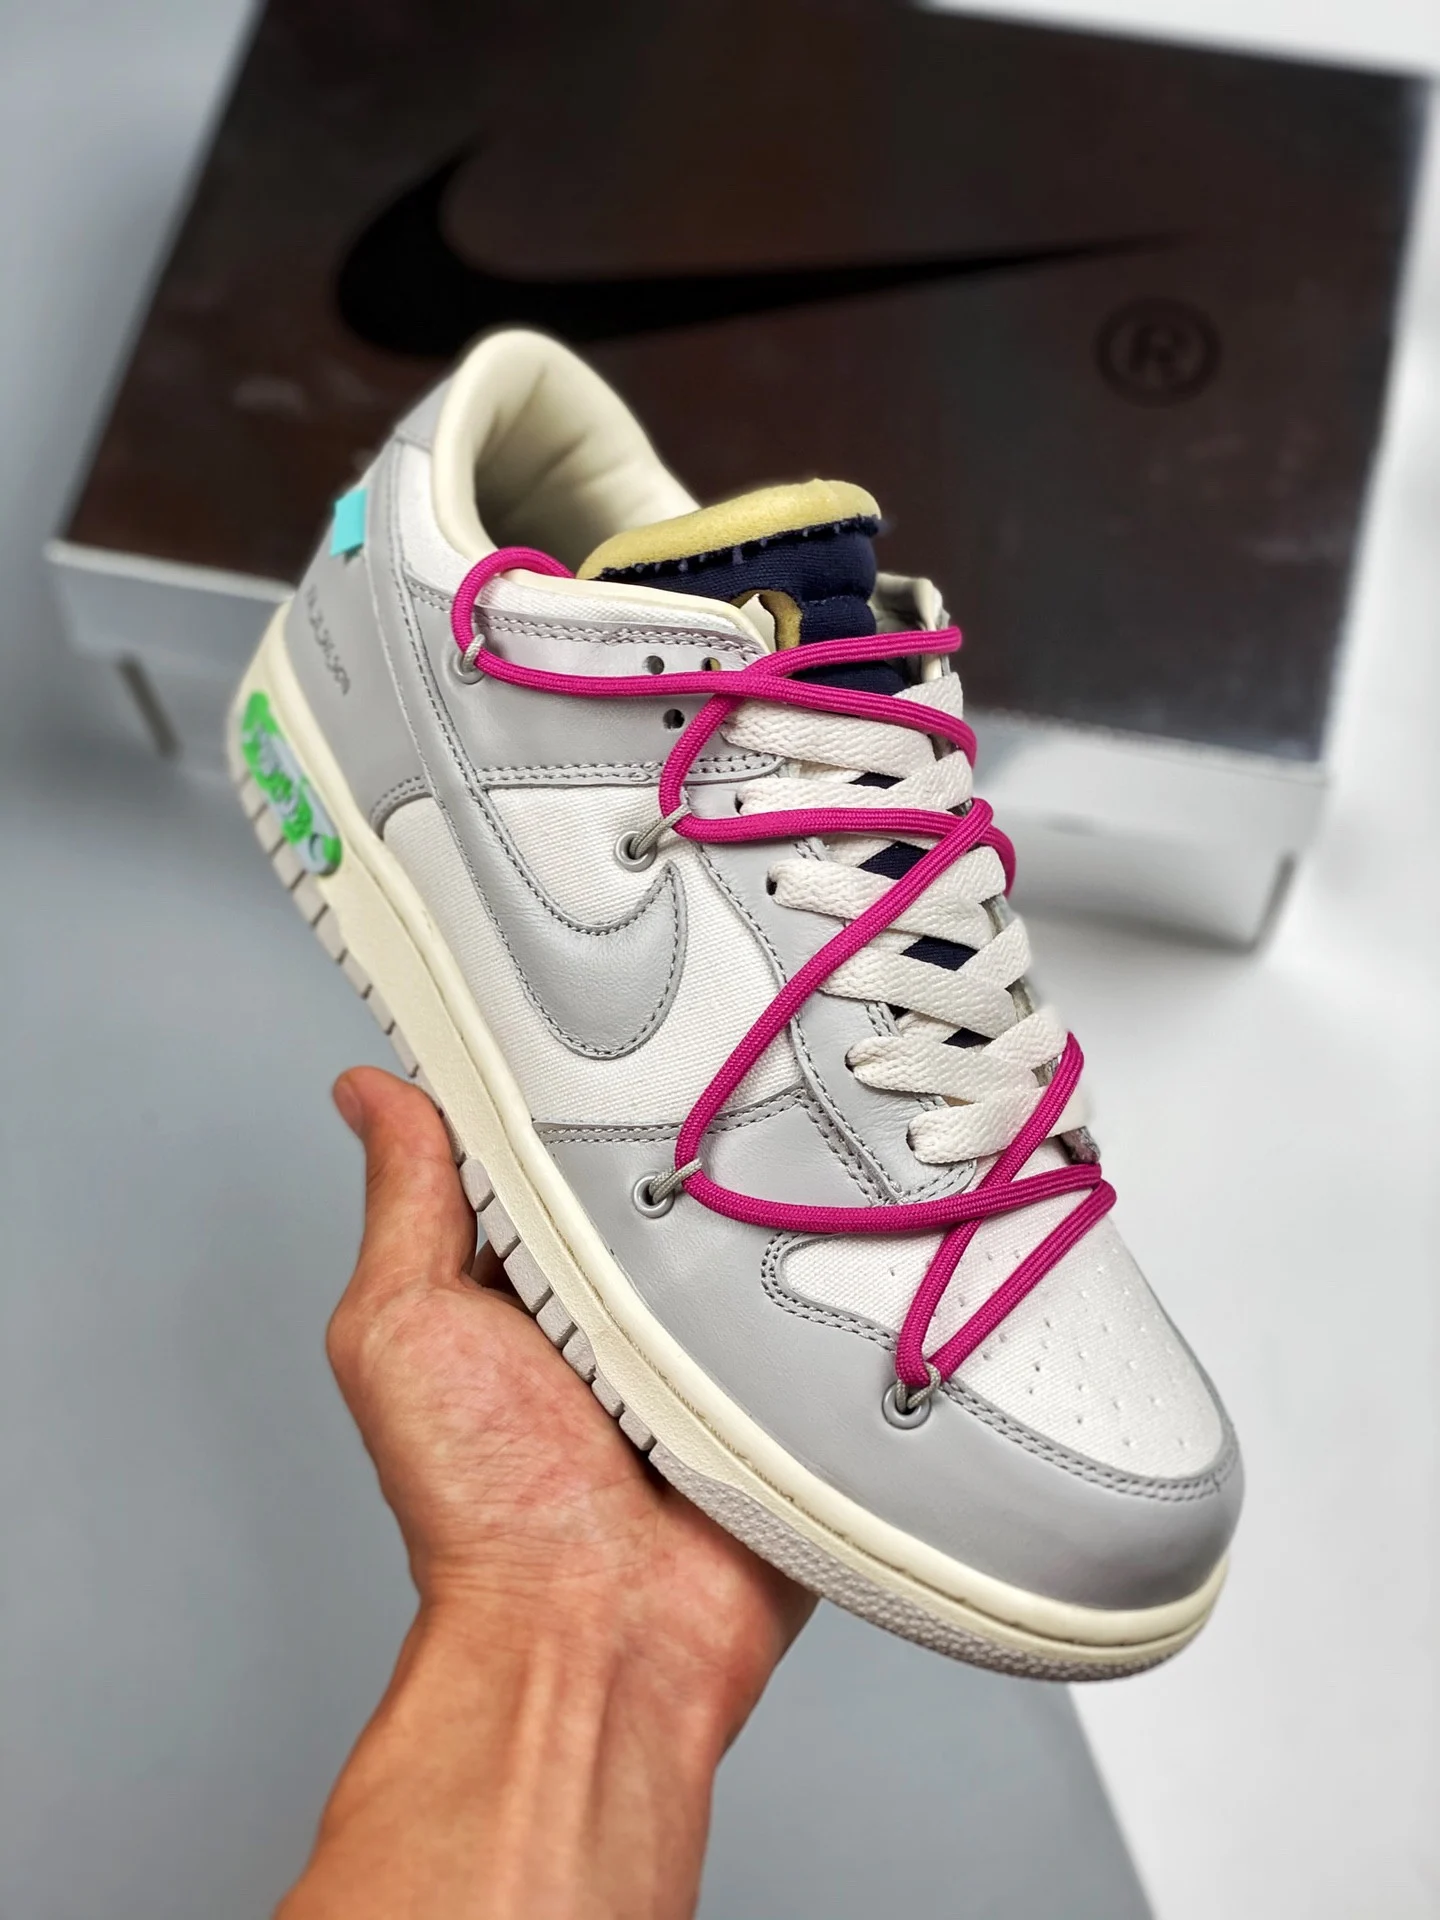 Off-White x Nike Dunk Low 30 of 50 Sail Grey Navy For Sale